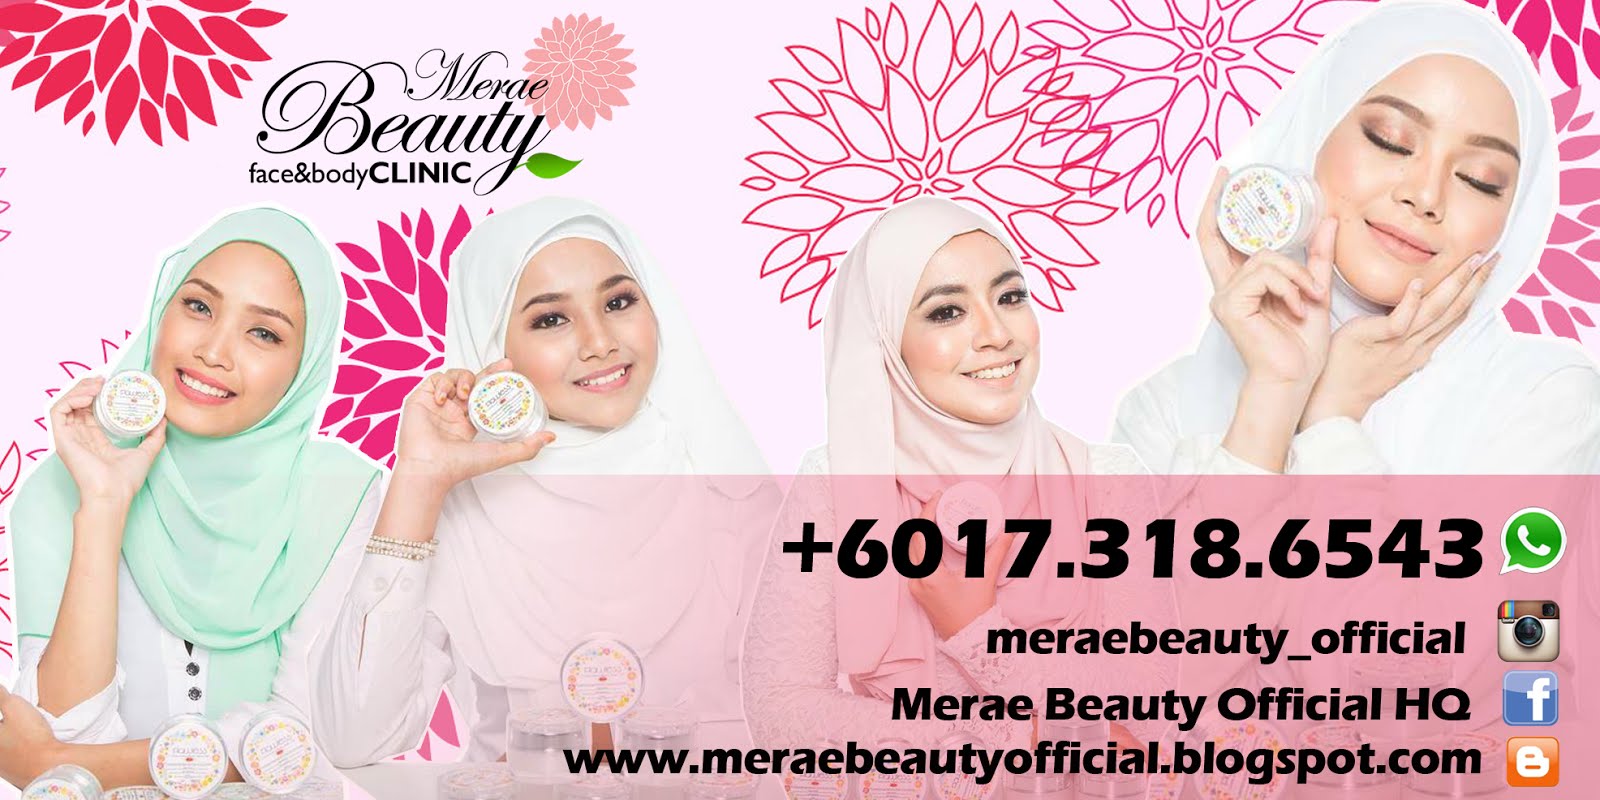 MERAE BEAUTY OFFICIAL HQ